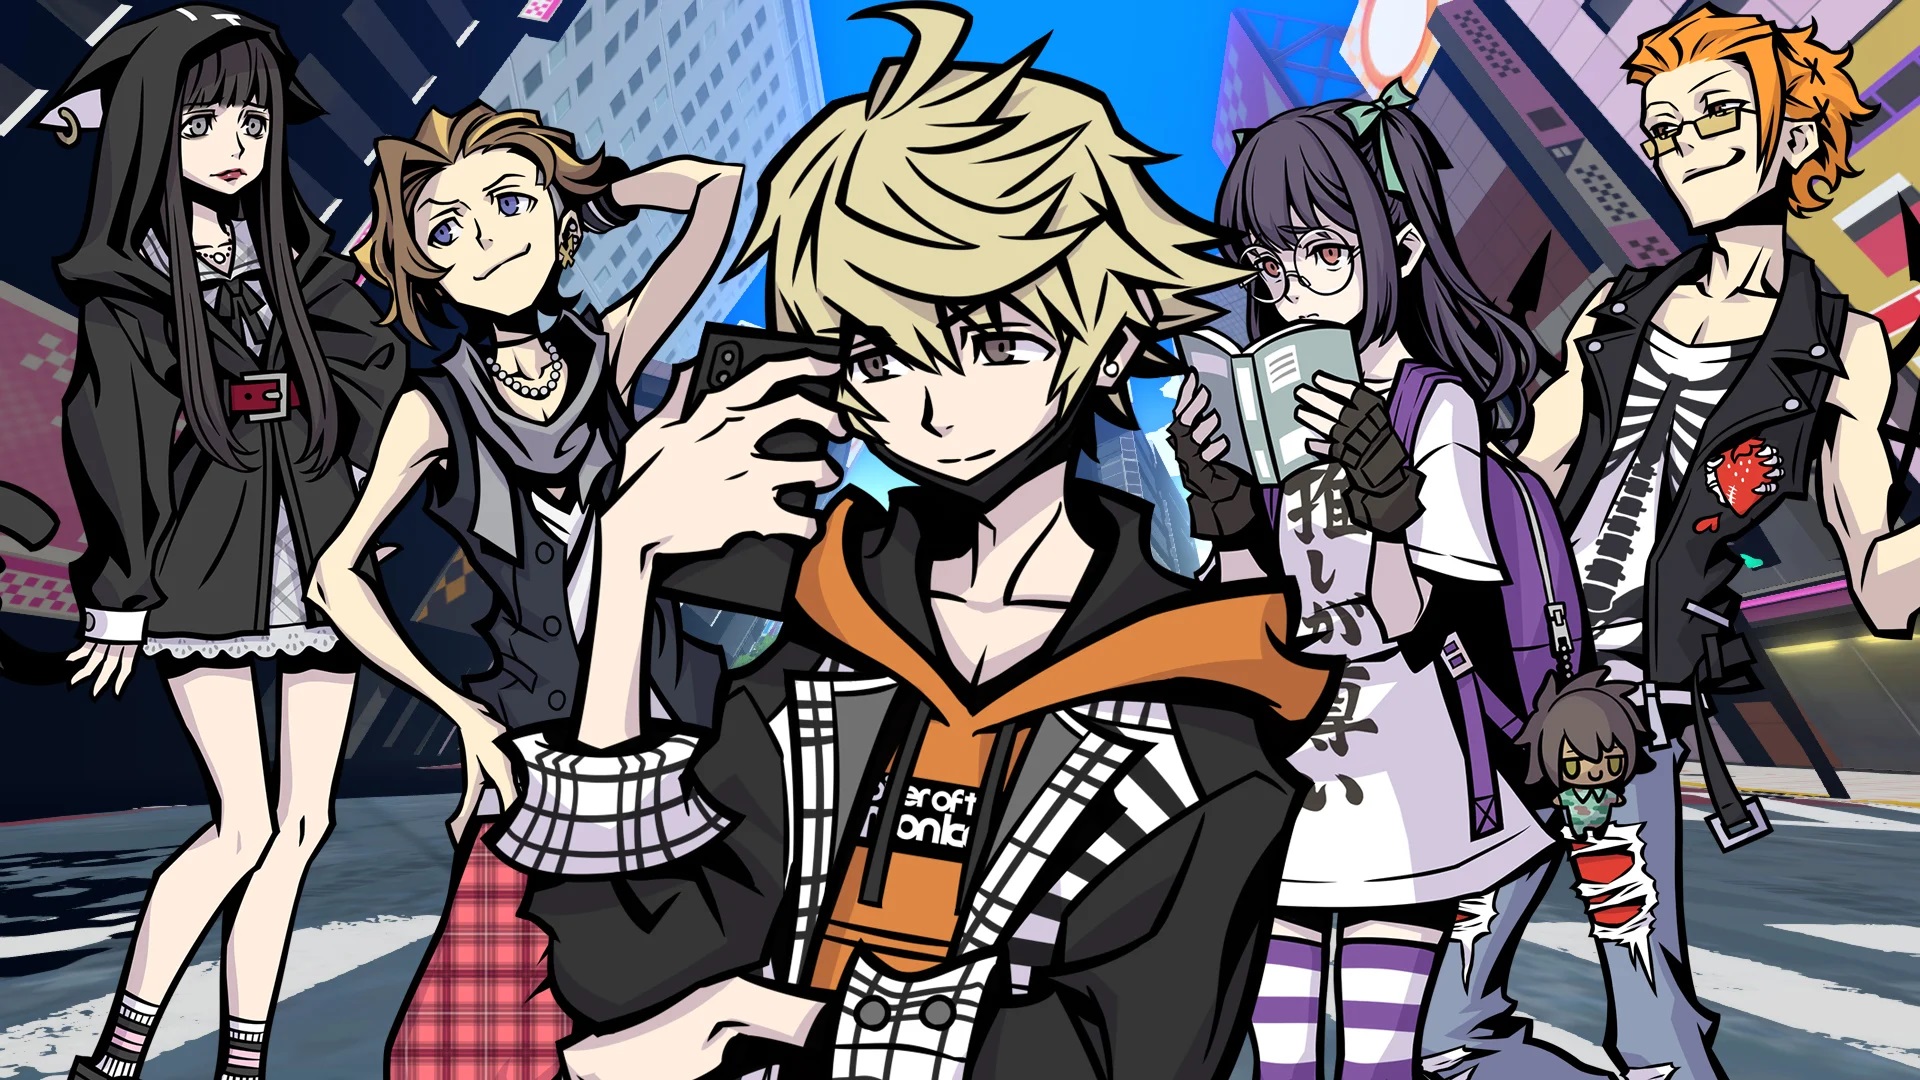 This is the world calling. Neo the World ends with you. The World ends with you игра. Neo the World ends with you ps4. Neo the World ends with you Switch.